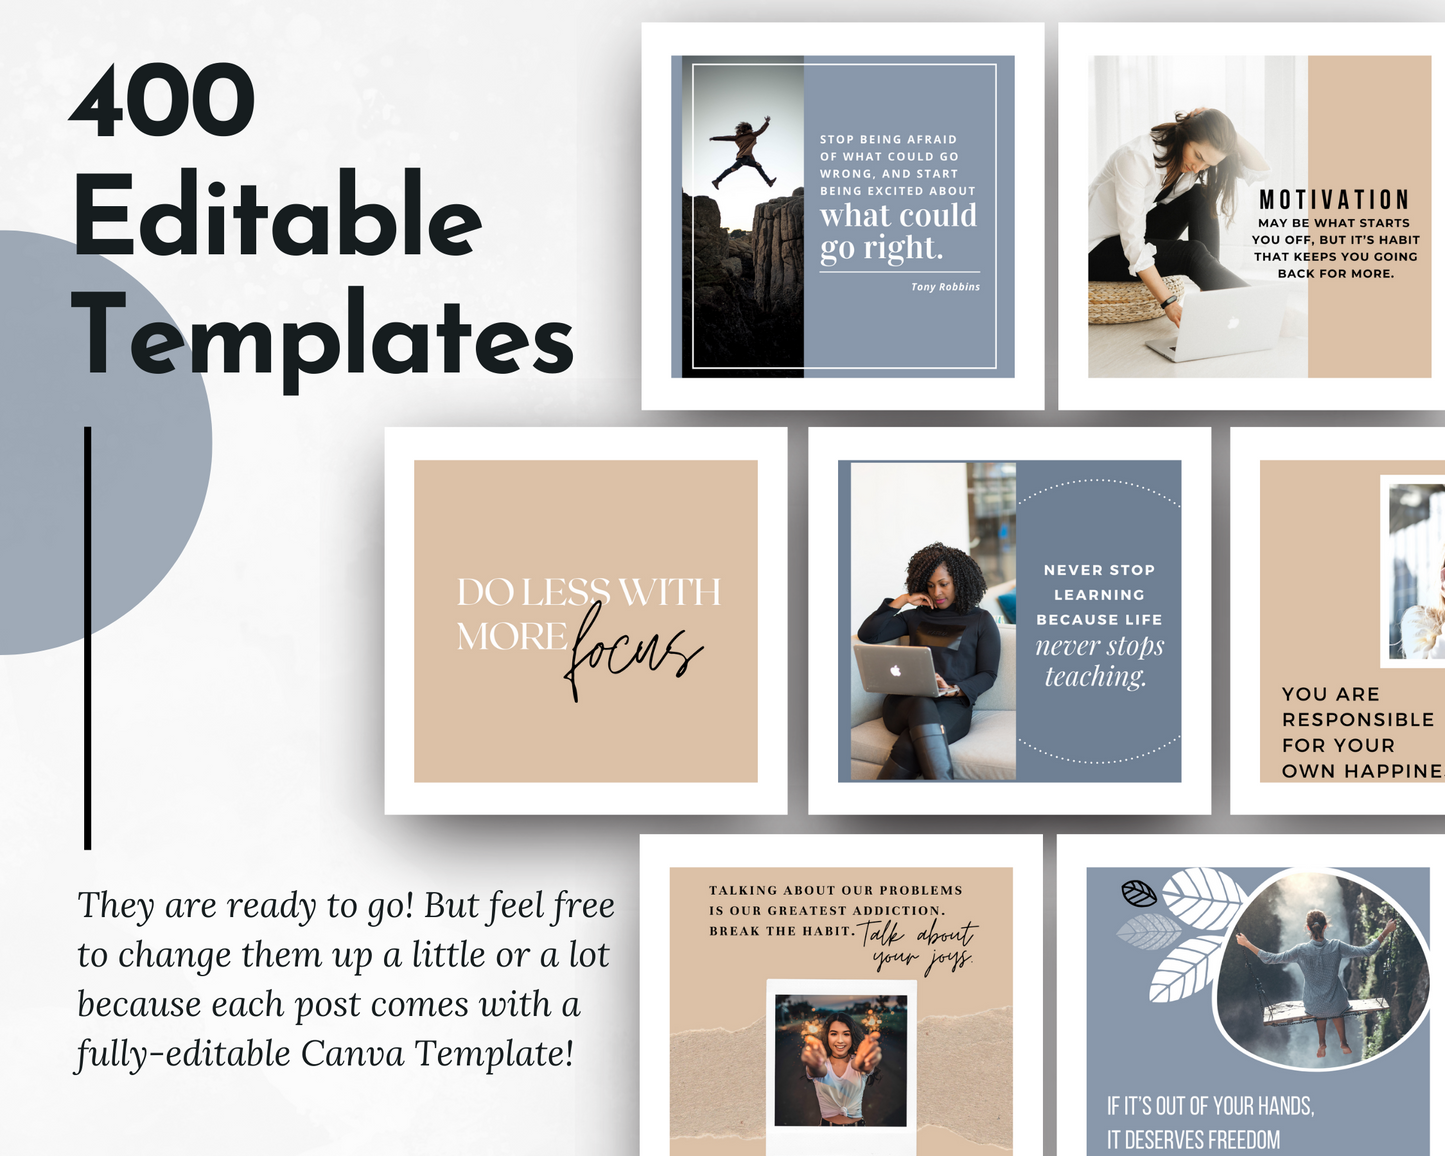 400 editable Instagram templates for Inspirational Social Media Posts with Canva Templates from Socially Inclined.